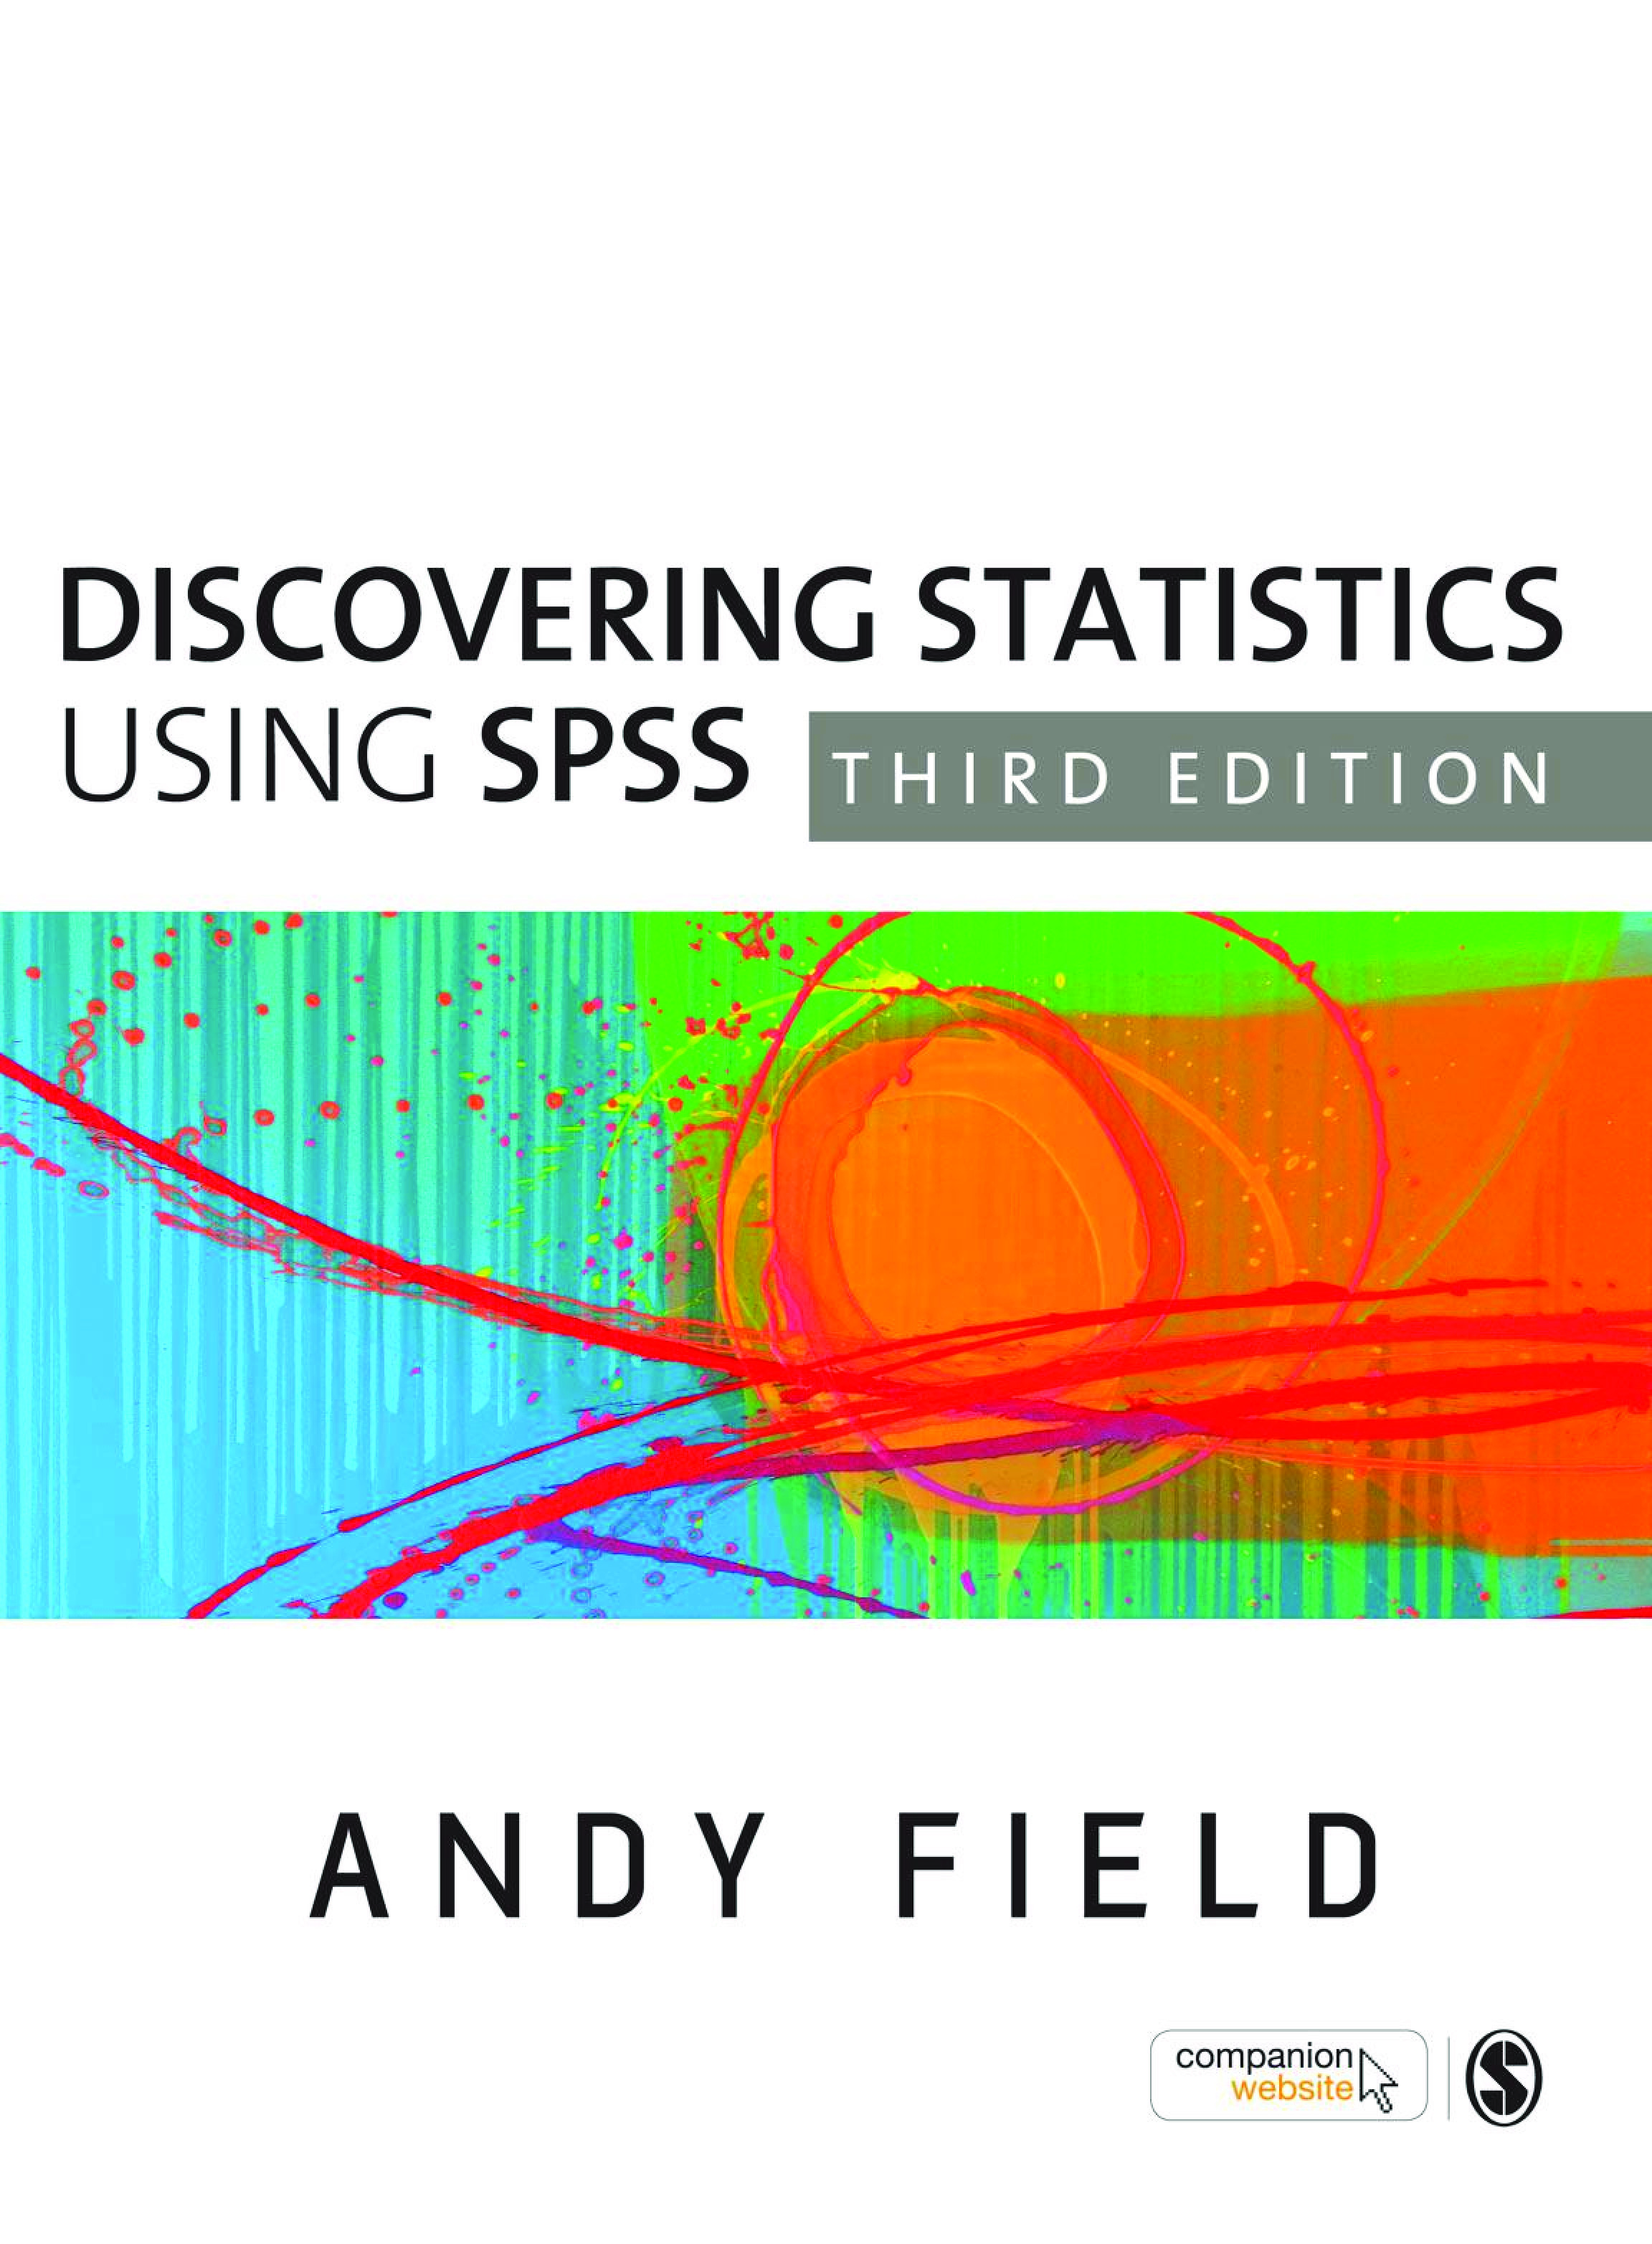 Discovering_Statistics_Using_SPSS_3rd_ed_Andy_Field